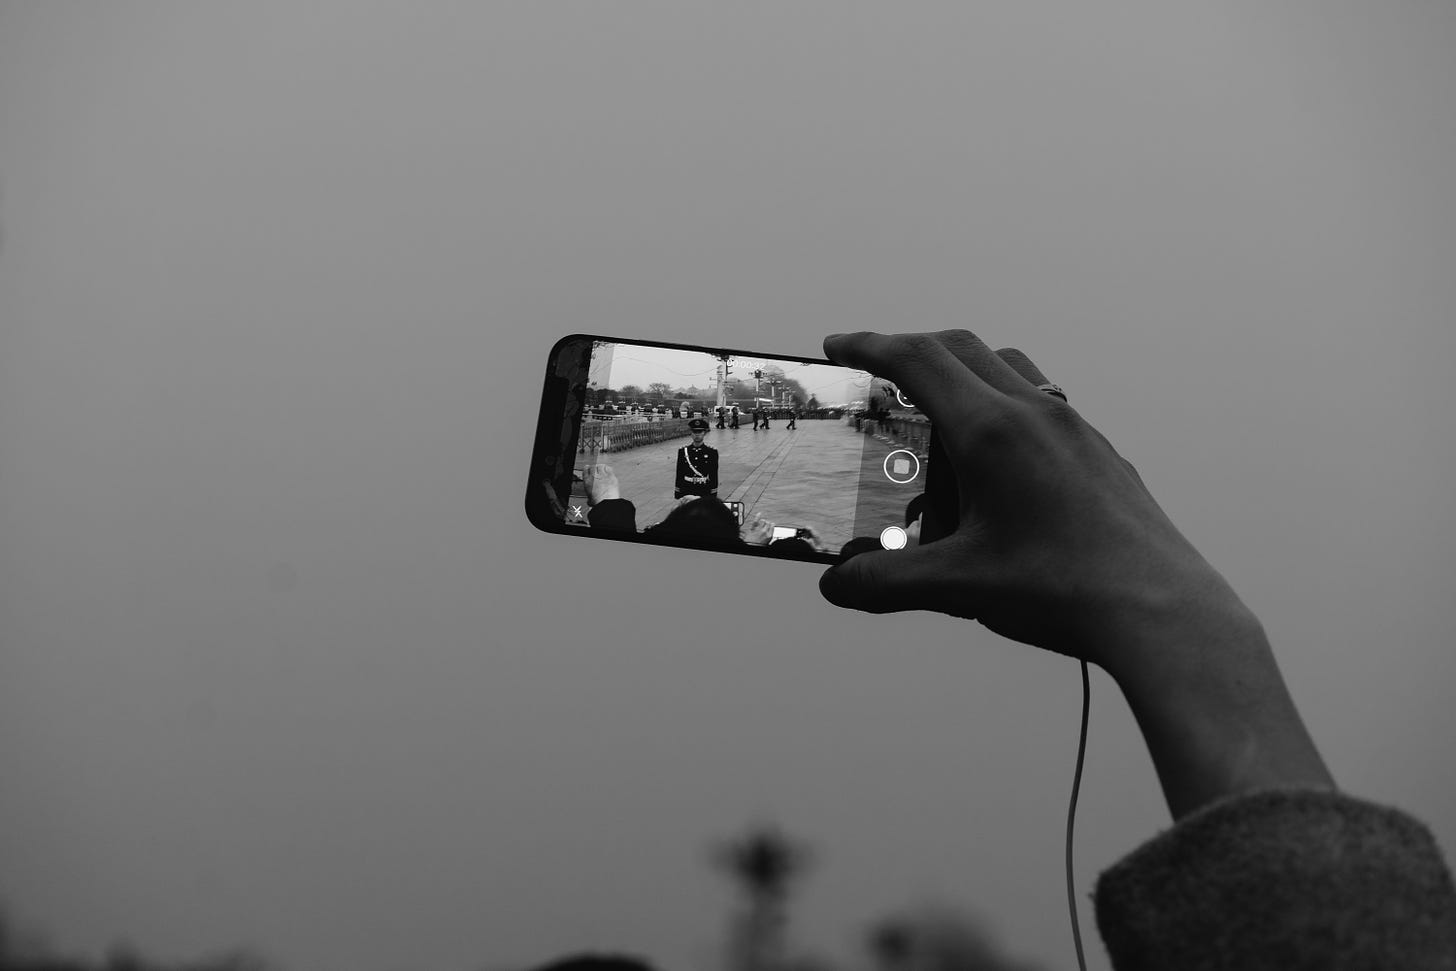 Grayscale photo of a hand holding an iphone taking video. Markus Winkler / Unsplash